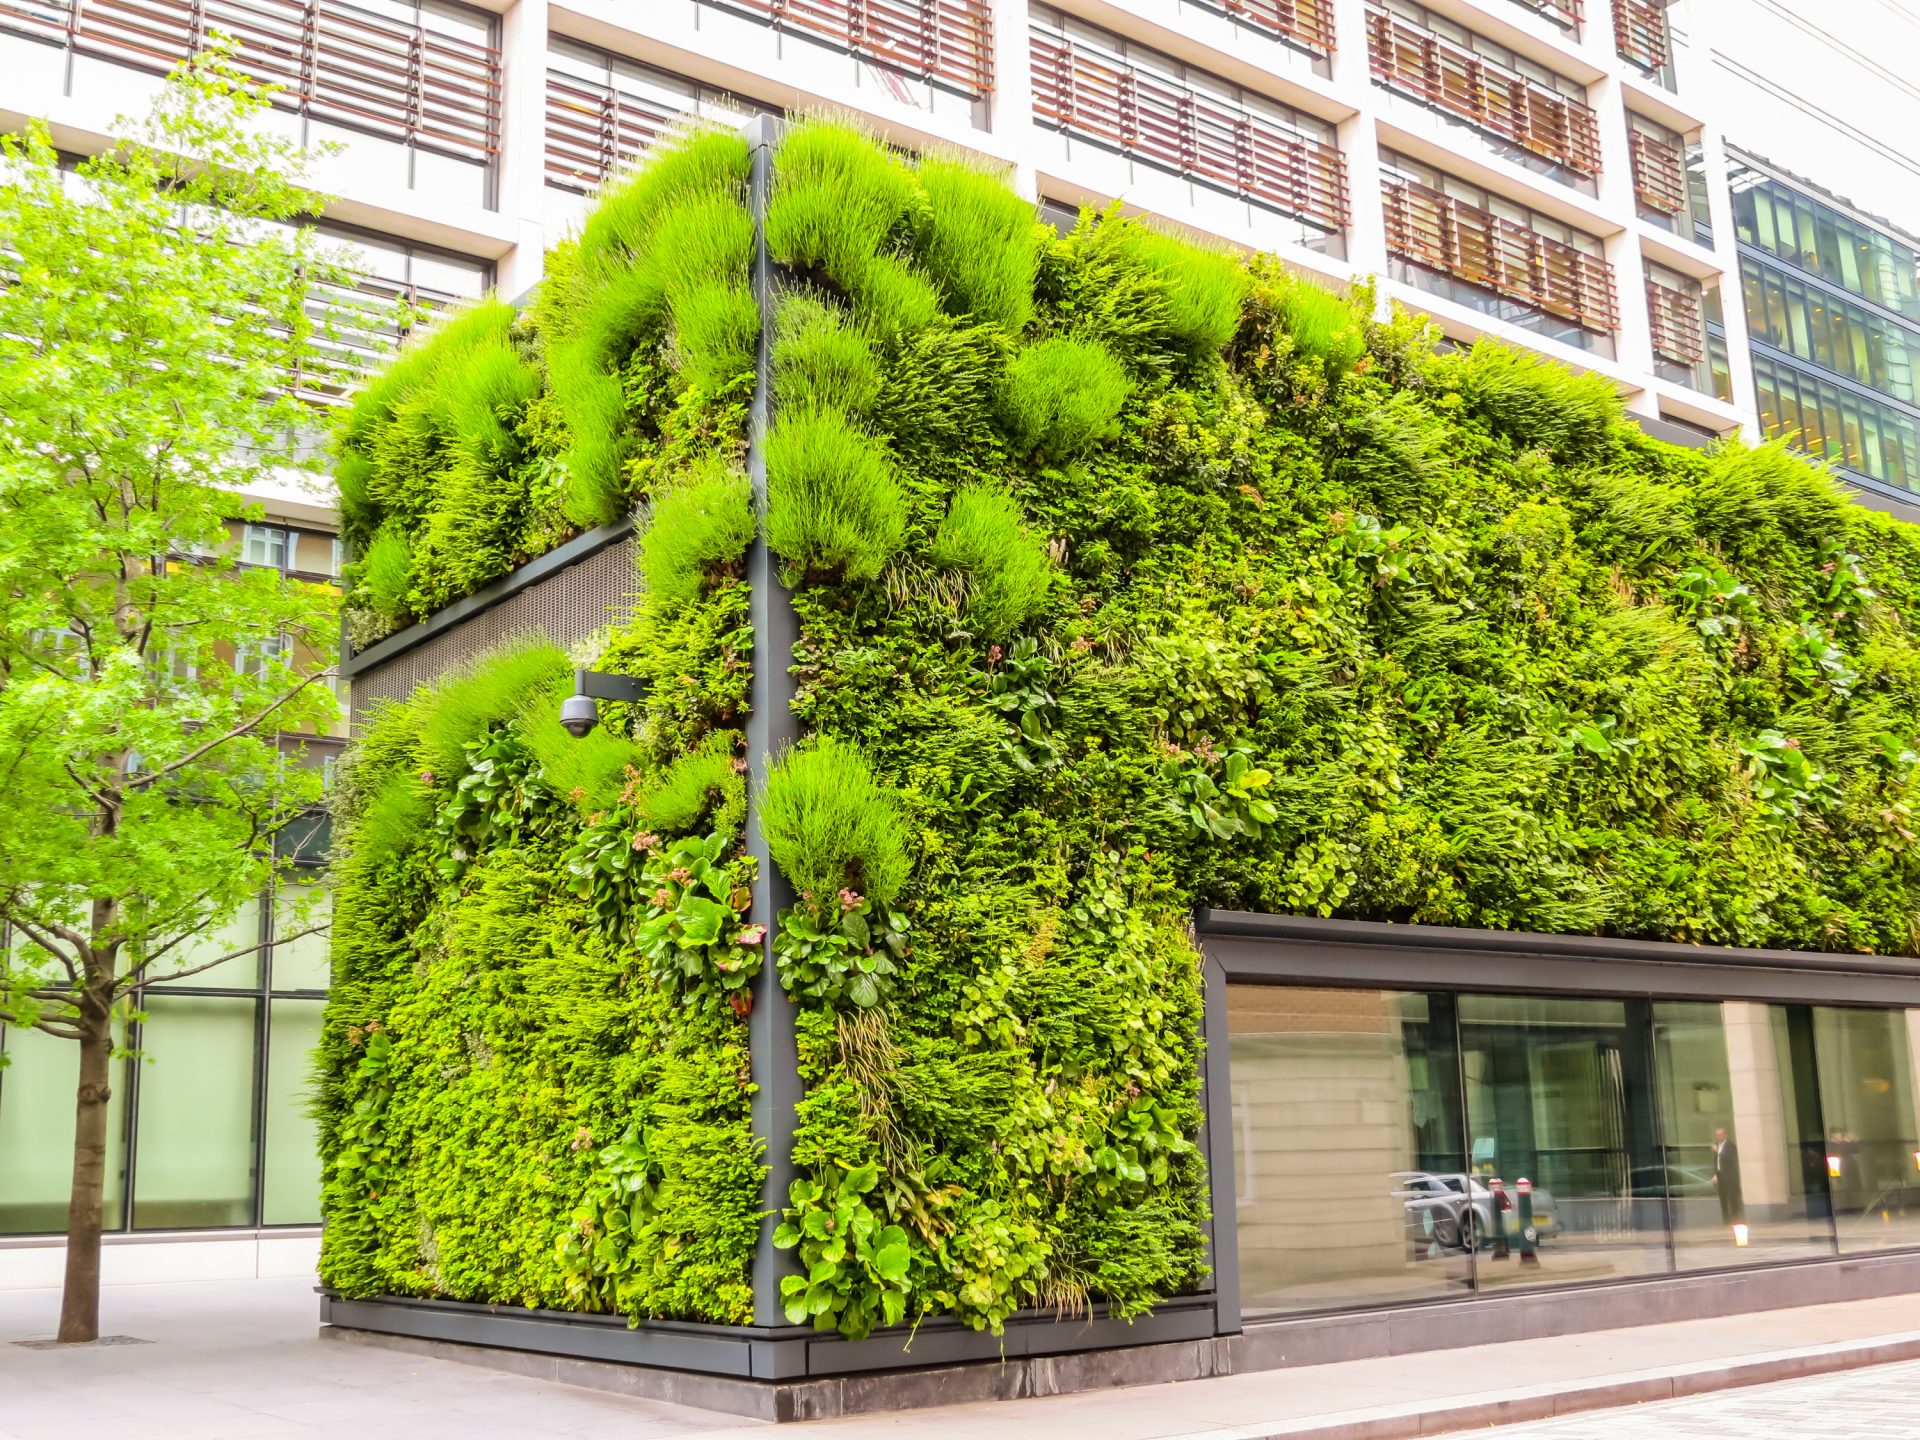 Eco city. Ecological architecture, live plants on a building facade